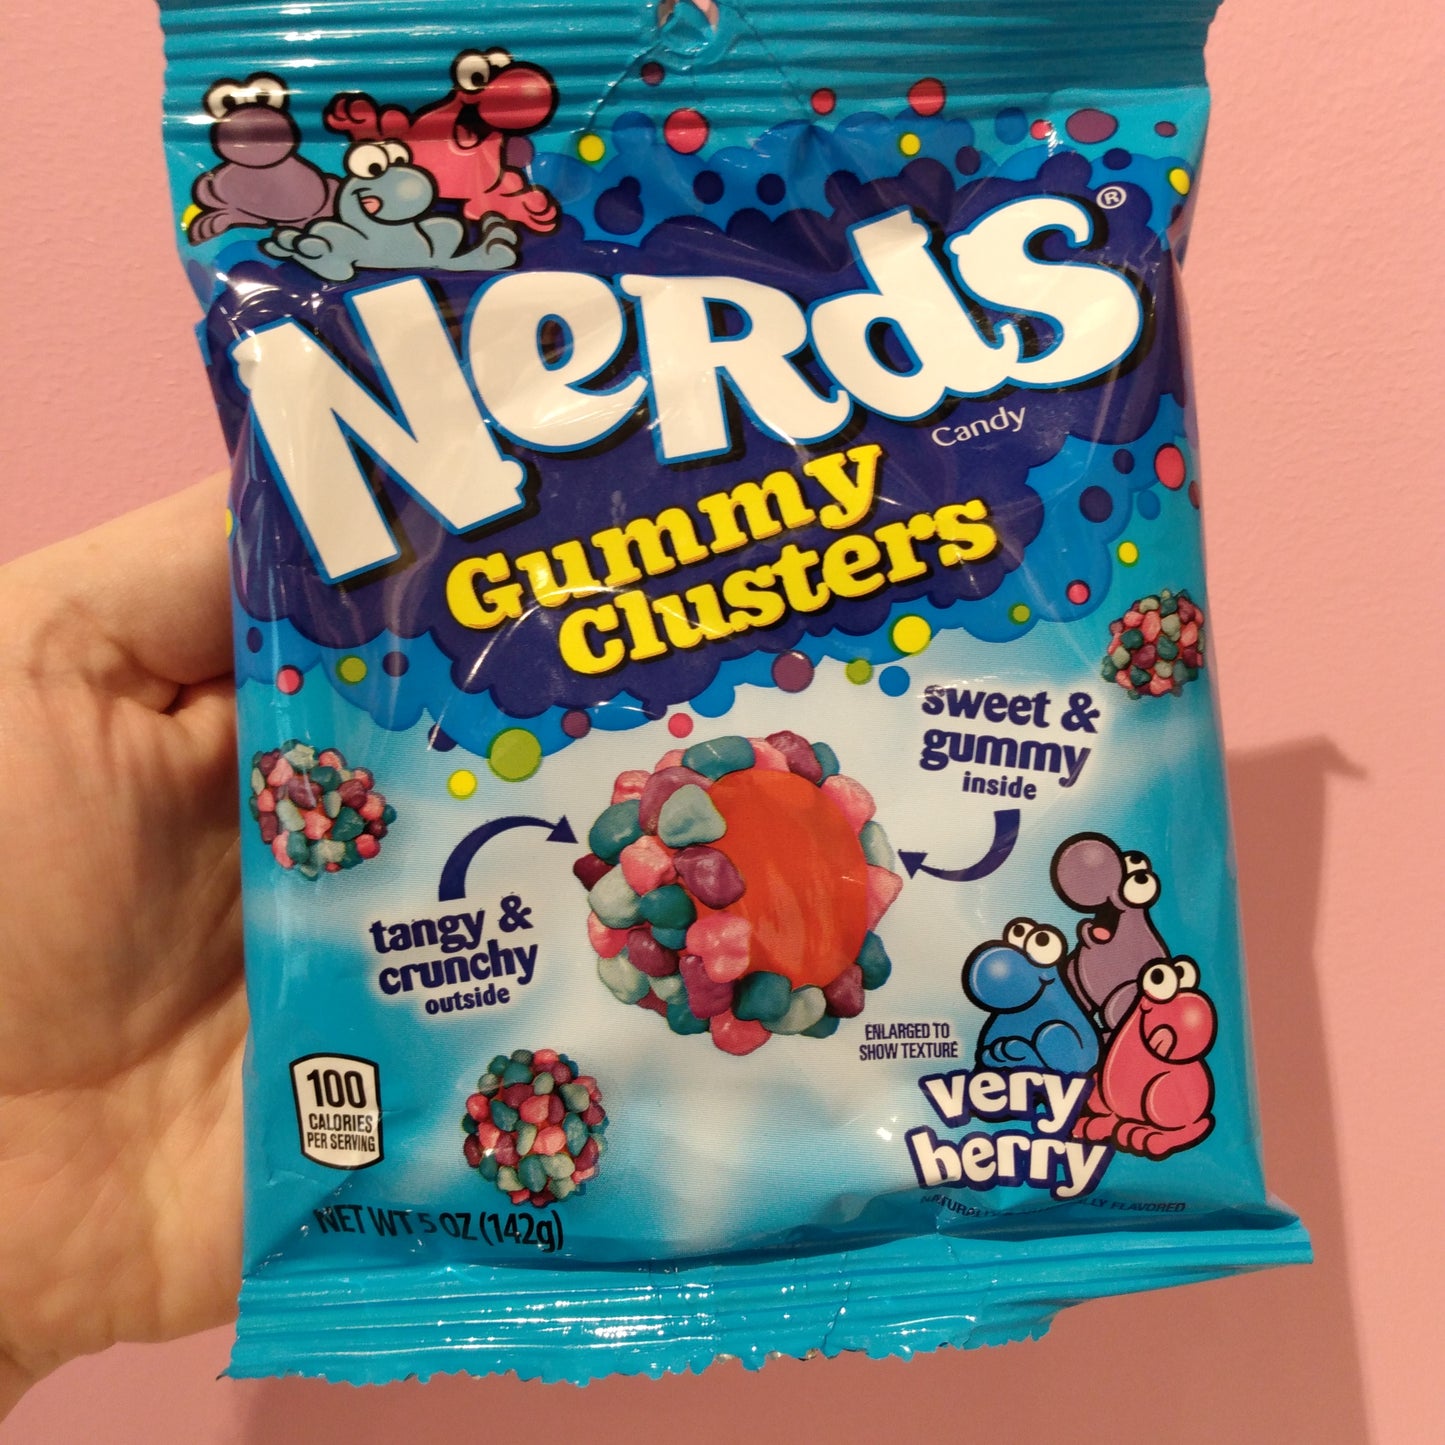 Nerds gummy clusters - Very Berry